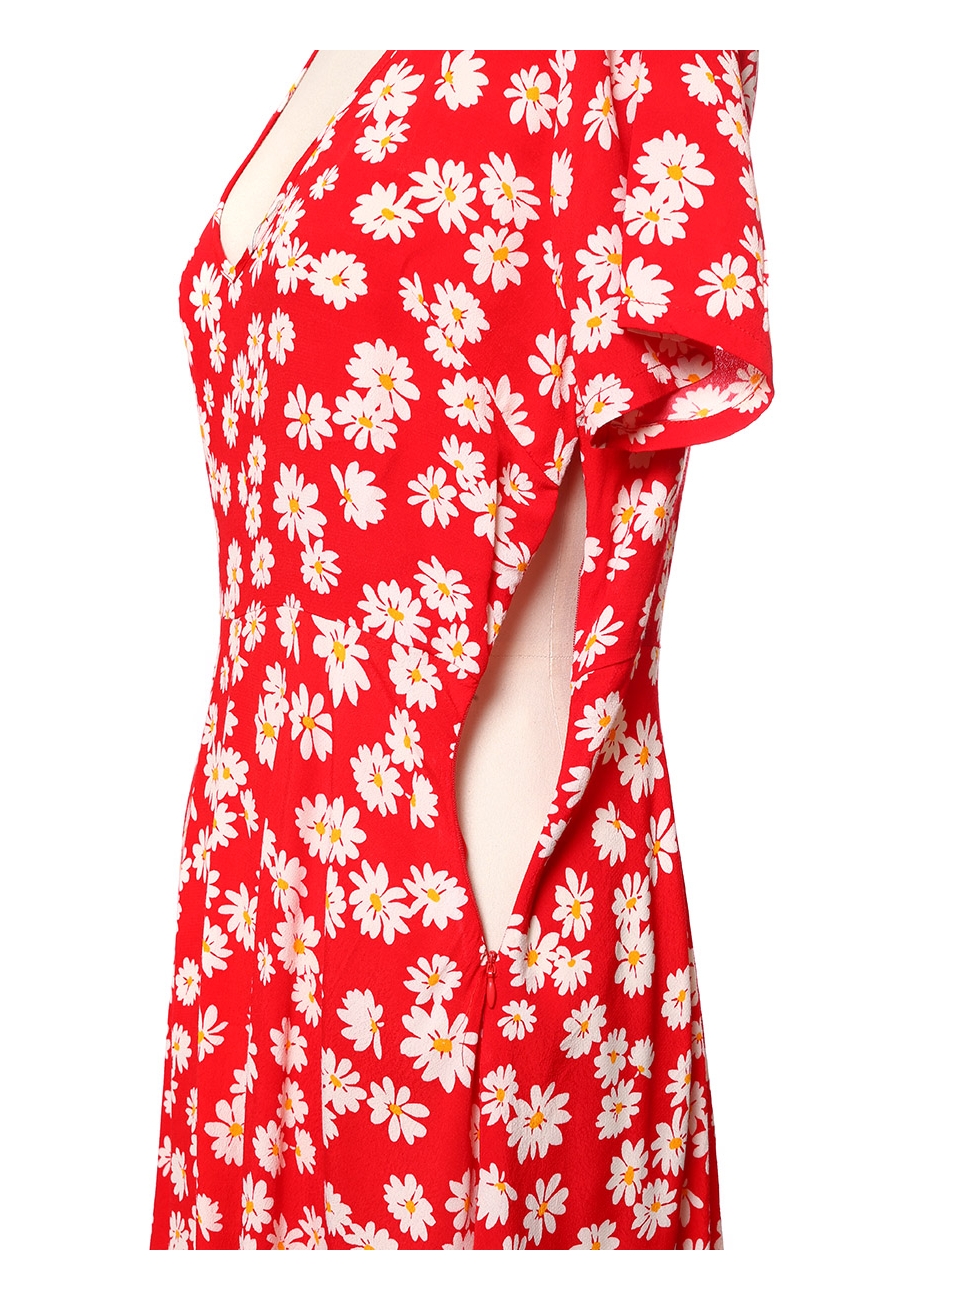 red dress with white daisies